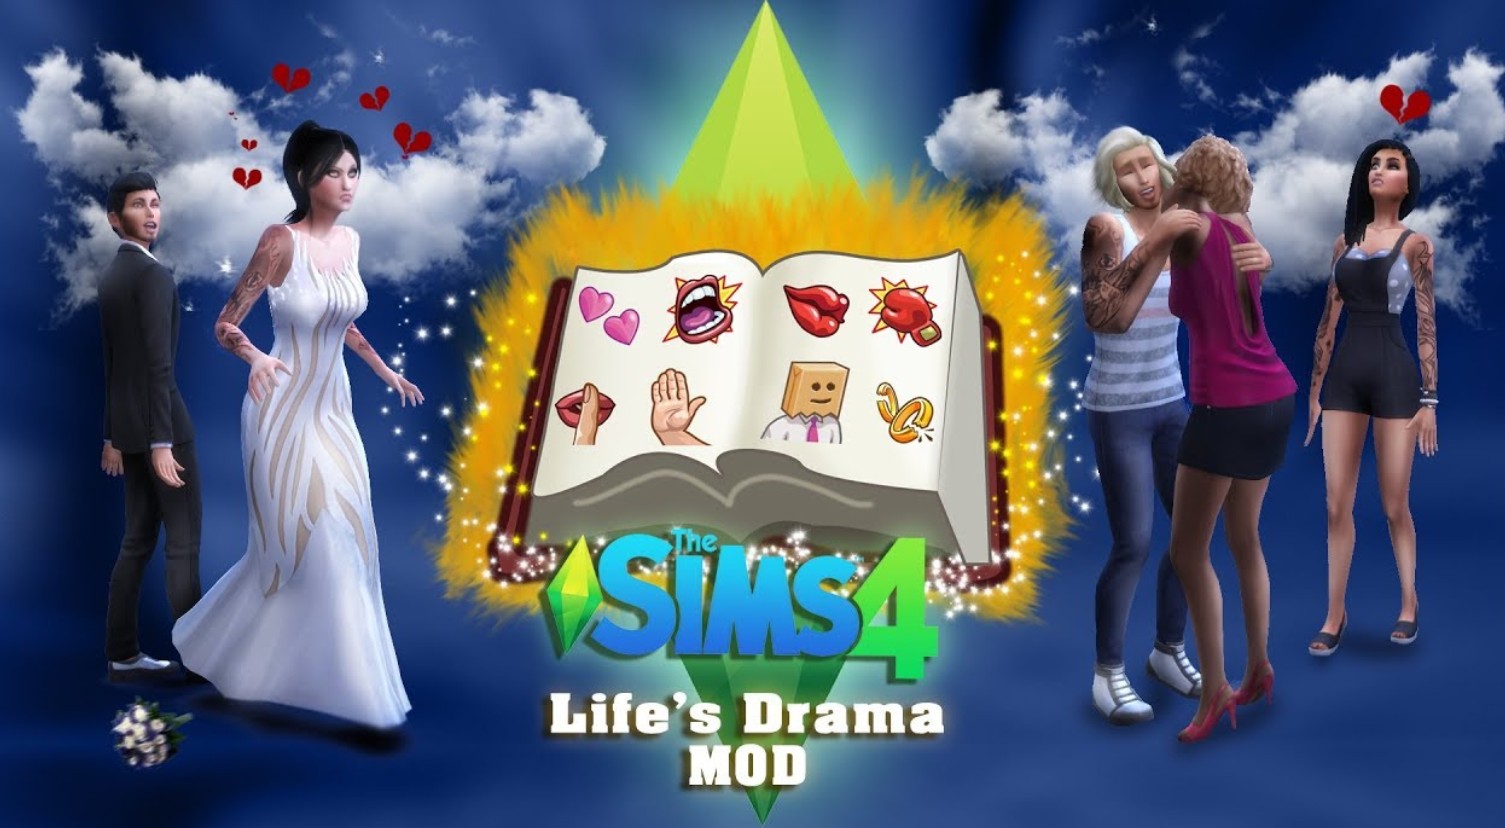 Real life is full of drama, now your sim's life can be too.